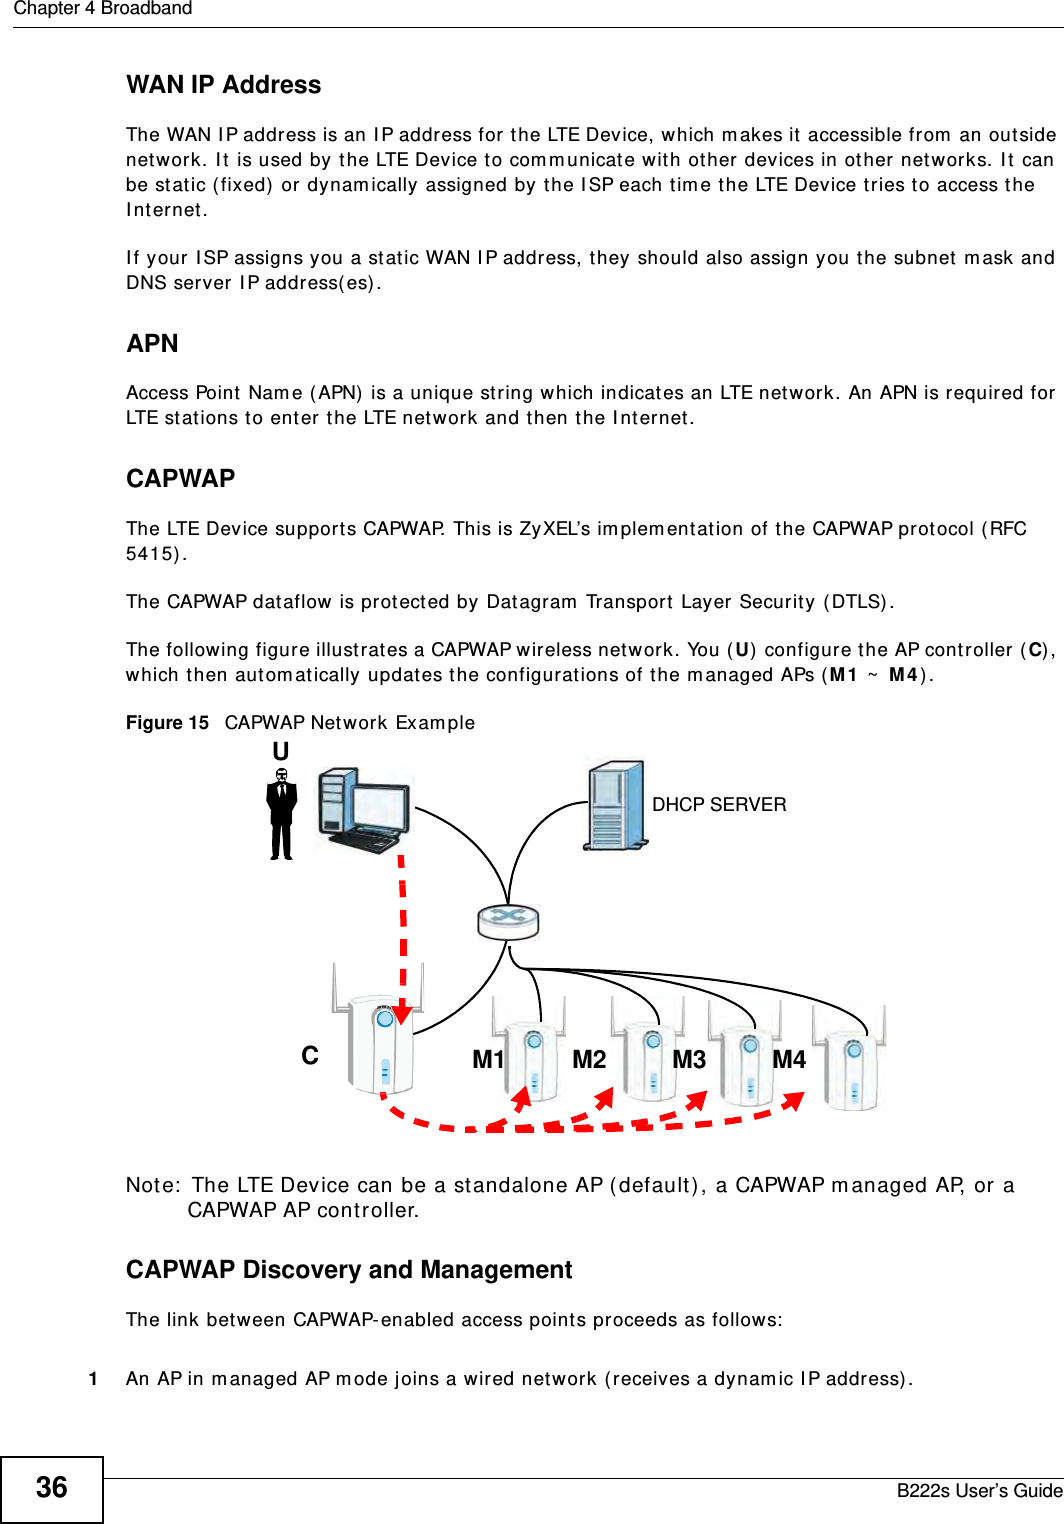 Chapter 4 BroadbandB222s User’s Guide36WAN IP AddressThe WAN I P address is an I P address for the LTE Device, which m akes it accessible from  an outside network. I t is used by t he LTE Device t o com m unicat e with ot her devices in ot her networks. I t can be stat ic ( fixed)  or dynam ically assigned by t he I SP each t im e the LTE Device t ries t o access t he I nt ernet.I f your I SP assigns you a stat ic WAN I P address, they should also assign you t he subnet  m ask and DNS server I P address(es).APNAccess Point Nam e ( APN) is a unique st ring which indicates an LTE net work. An APN is required for LTE stations t o ent er t he LTE net work and t hen t he I nternet .CAPWAPThe LTE Device supports CAPWAP. This is ZyXEL’s im plem ent ation of the CAPWAP prot ocol (RFC 5415) . The CAPWAP dat aflow is protect ed by Dat agram  Transport  Layer Securit y (DTLS) .The following figure illust rat es a CAPWAP wireless network. You ( U) configure t he AP cont roller ( C), which then autom atically updat es the configurat ions of t he m anaged APs ( M1  ~  M 4 ) . Figure 15   CAPWAP Net work Exam pleNote:  The LTE Device can be a st andalone AP ( default ), a CAPWAP m anaged AP, or a CAPWAP AP controller.CAPWAP Discovery and ManagementThe link between CAPWAP- enabled access points proceeds as follows:1An AP in m anaged AP m ode j oins a wired net w ork ( receives a dynam ic I P address) .UCM1 M2 M3 M4DHCP SERVER